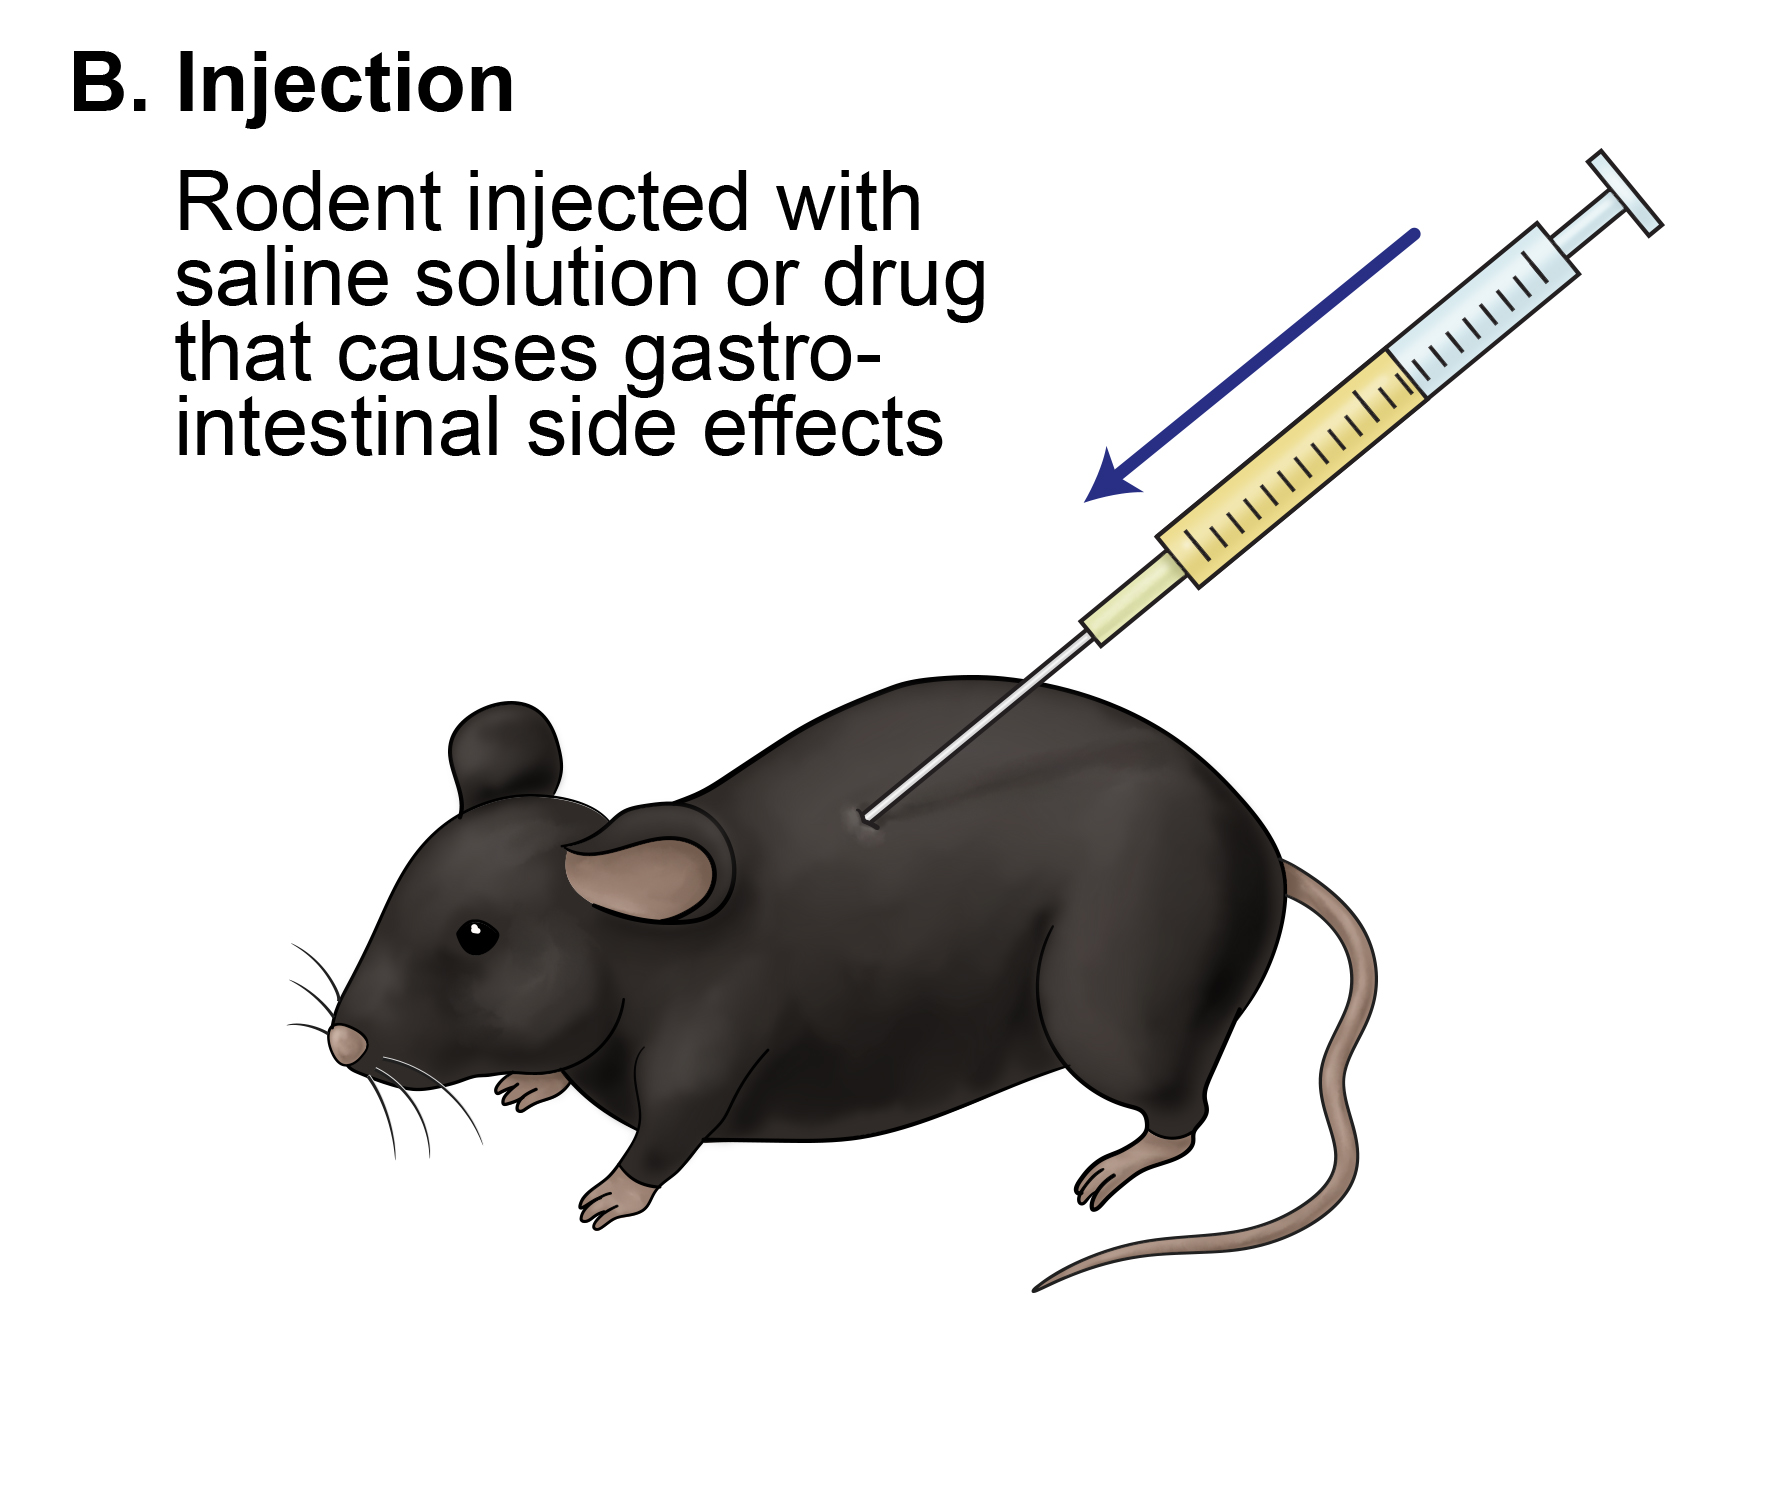 Rodent injected with saline solution or drug that causes gastrointestinal side effects